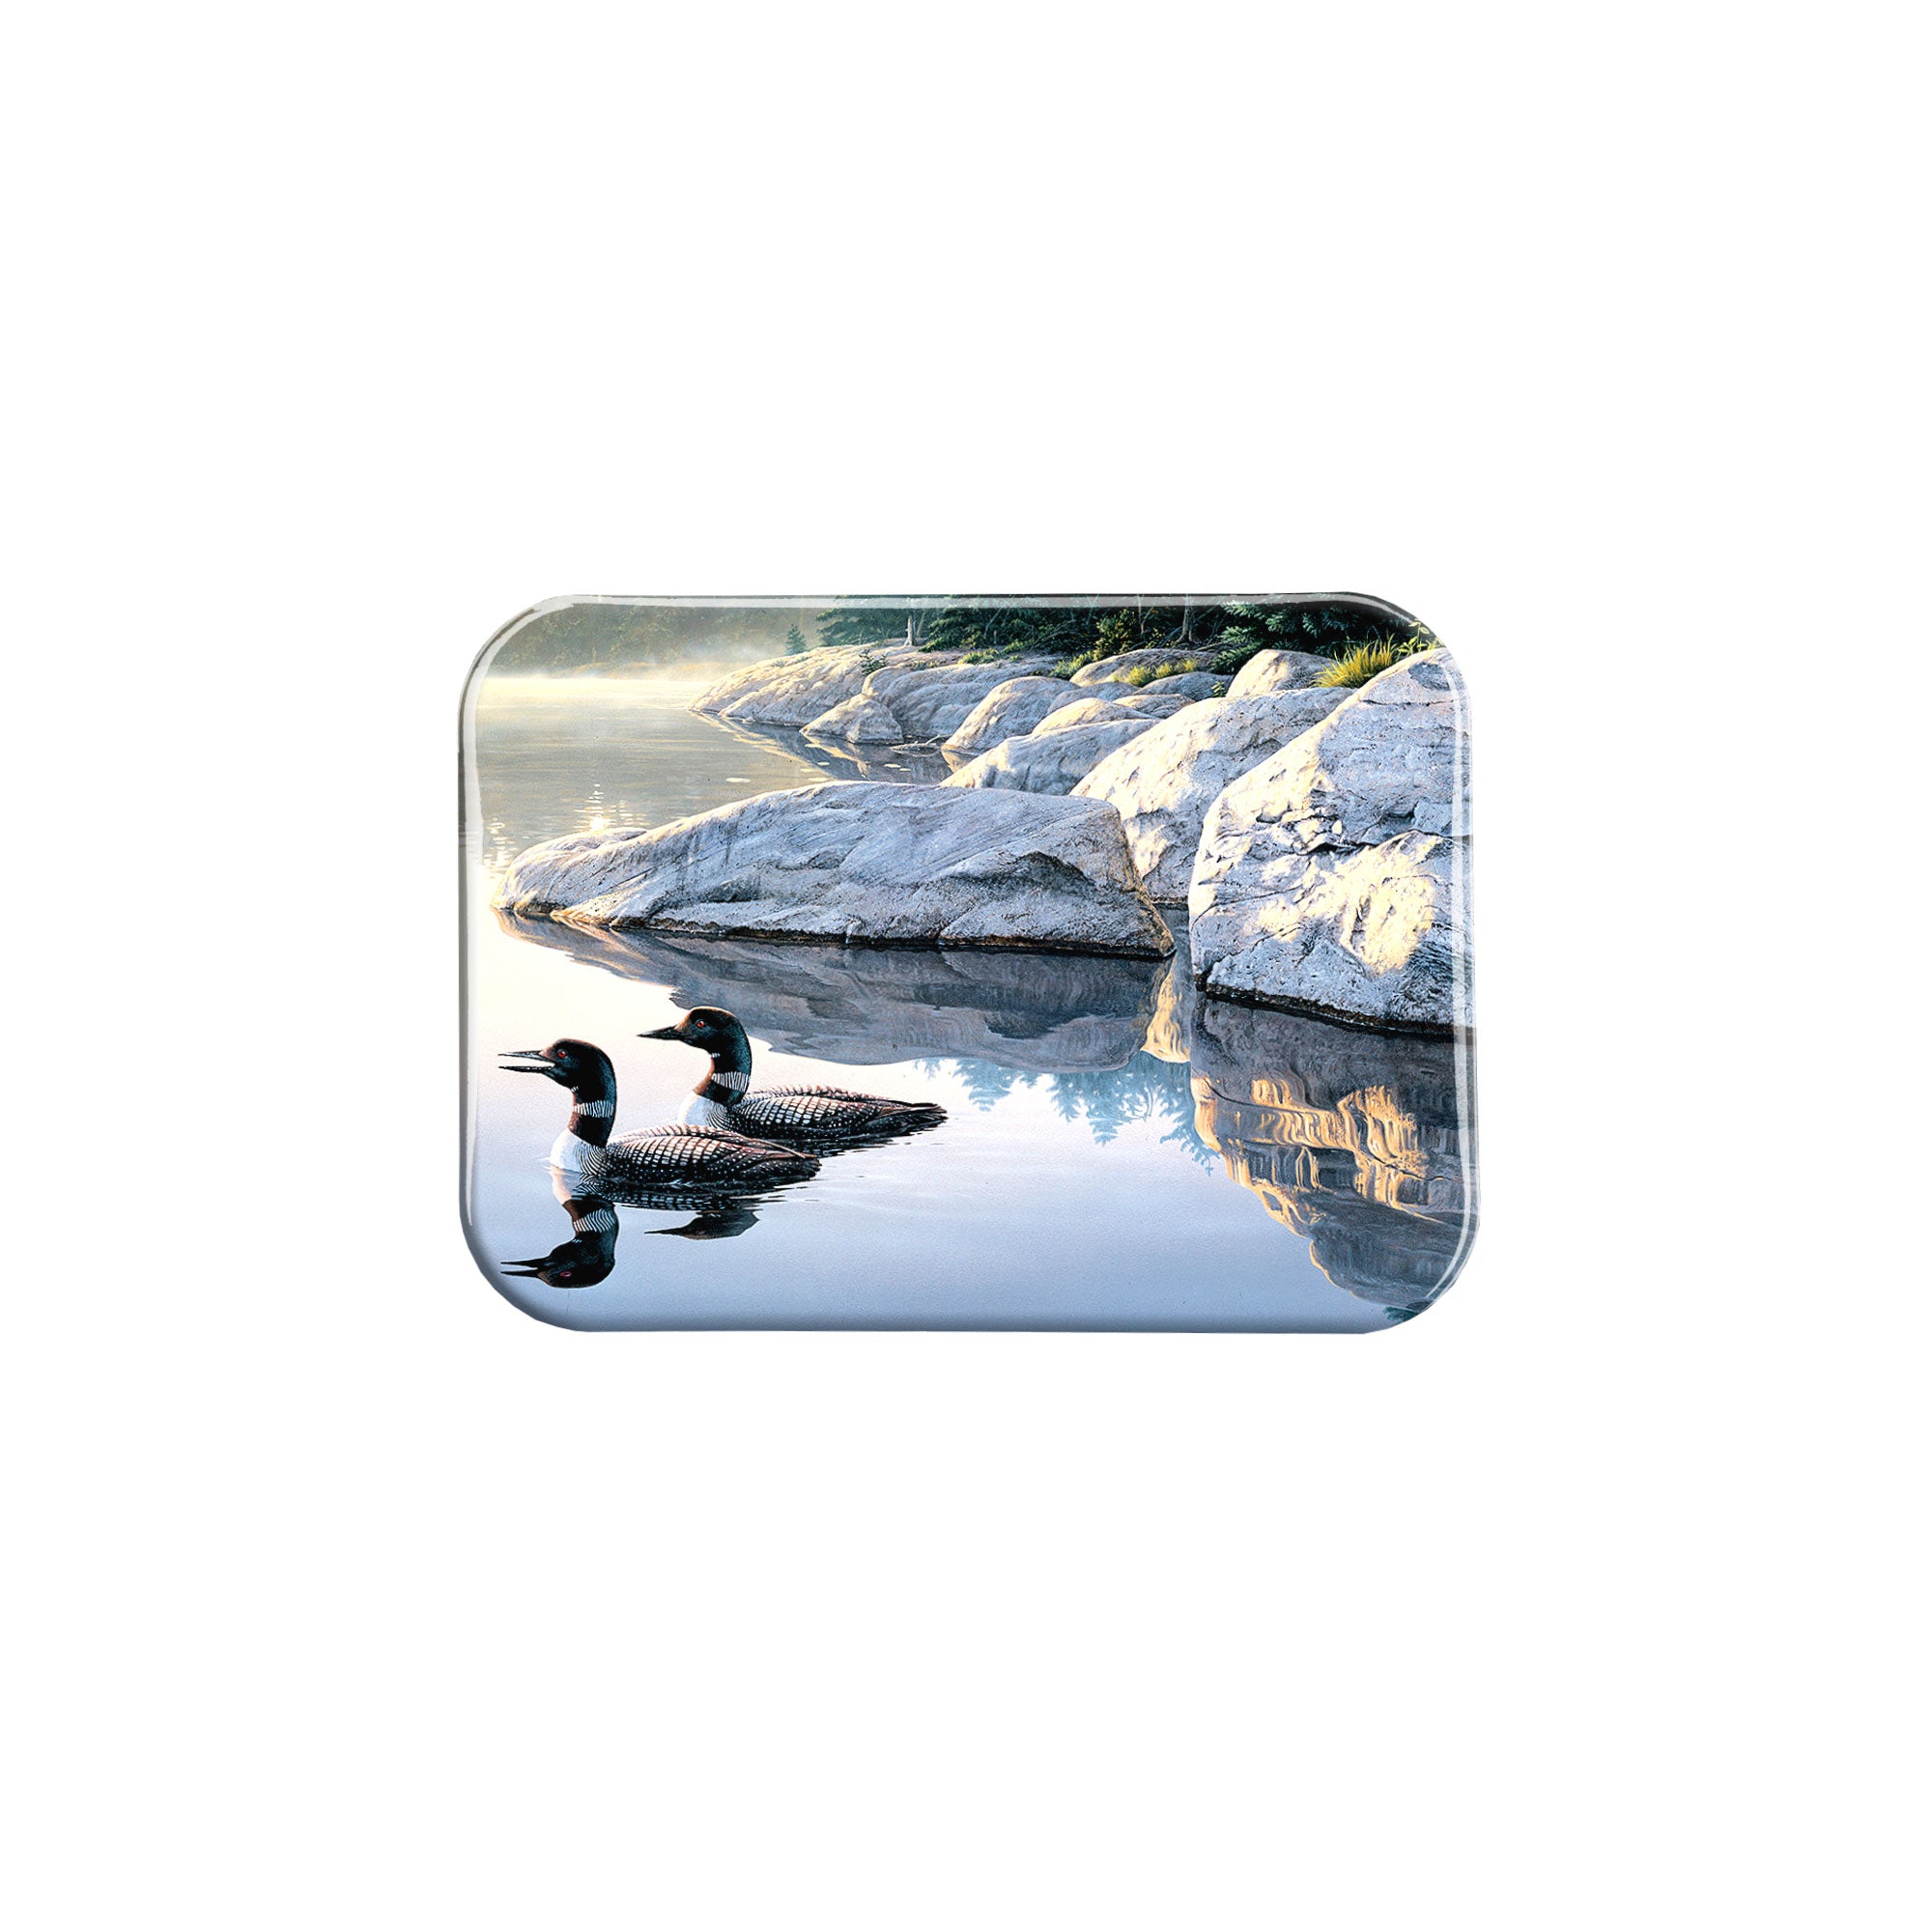 "Two Loons in a pond" - 2.5" X 3.5" Rectangle Fridge Magnets